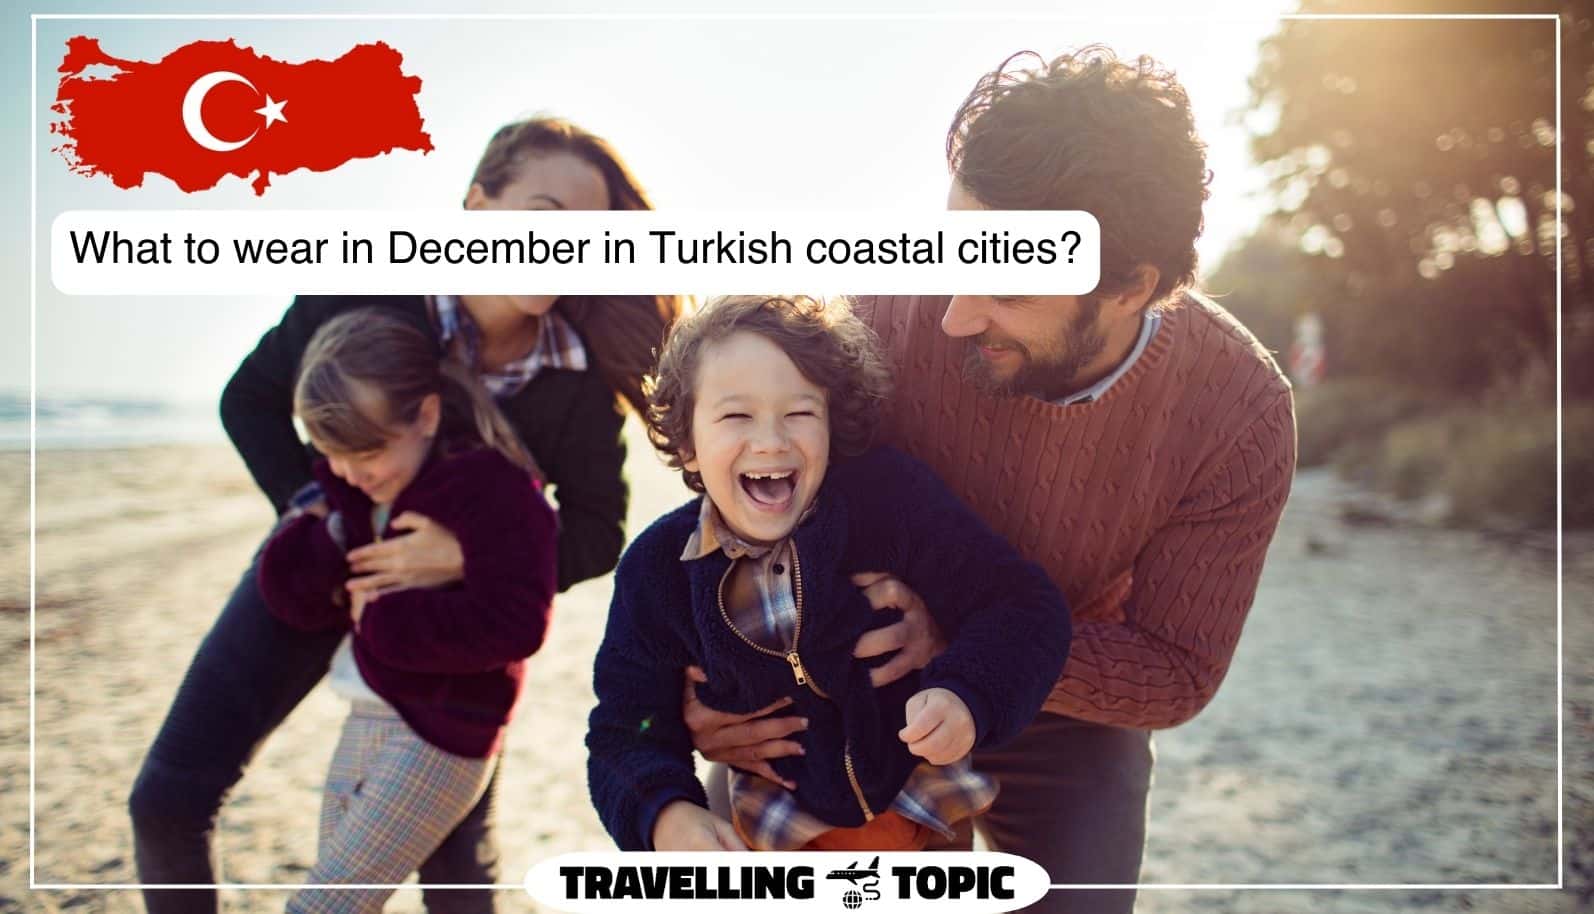 What to wear in December in Turkish coastal cities